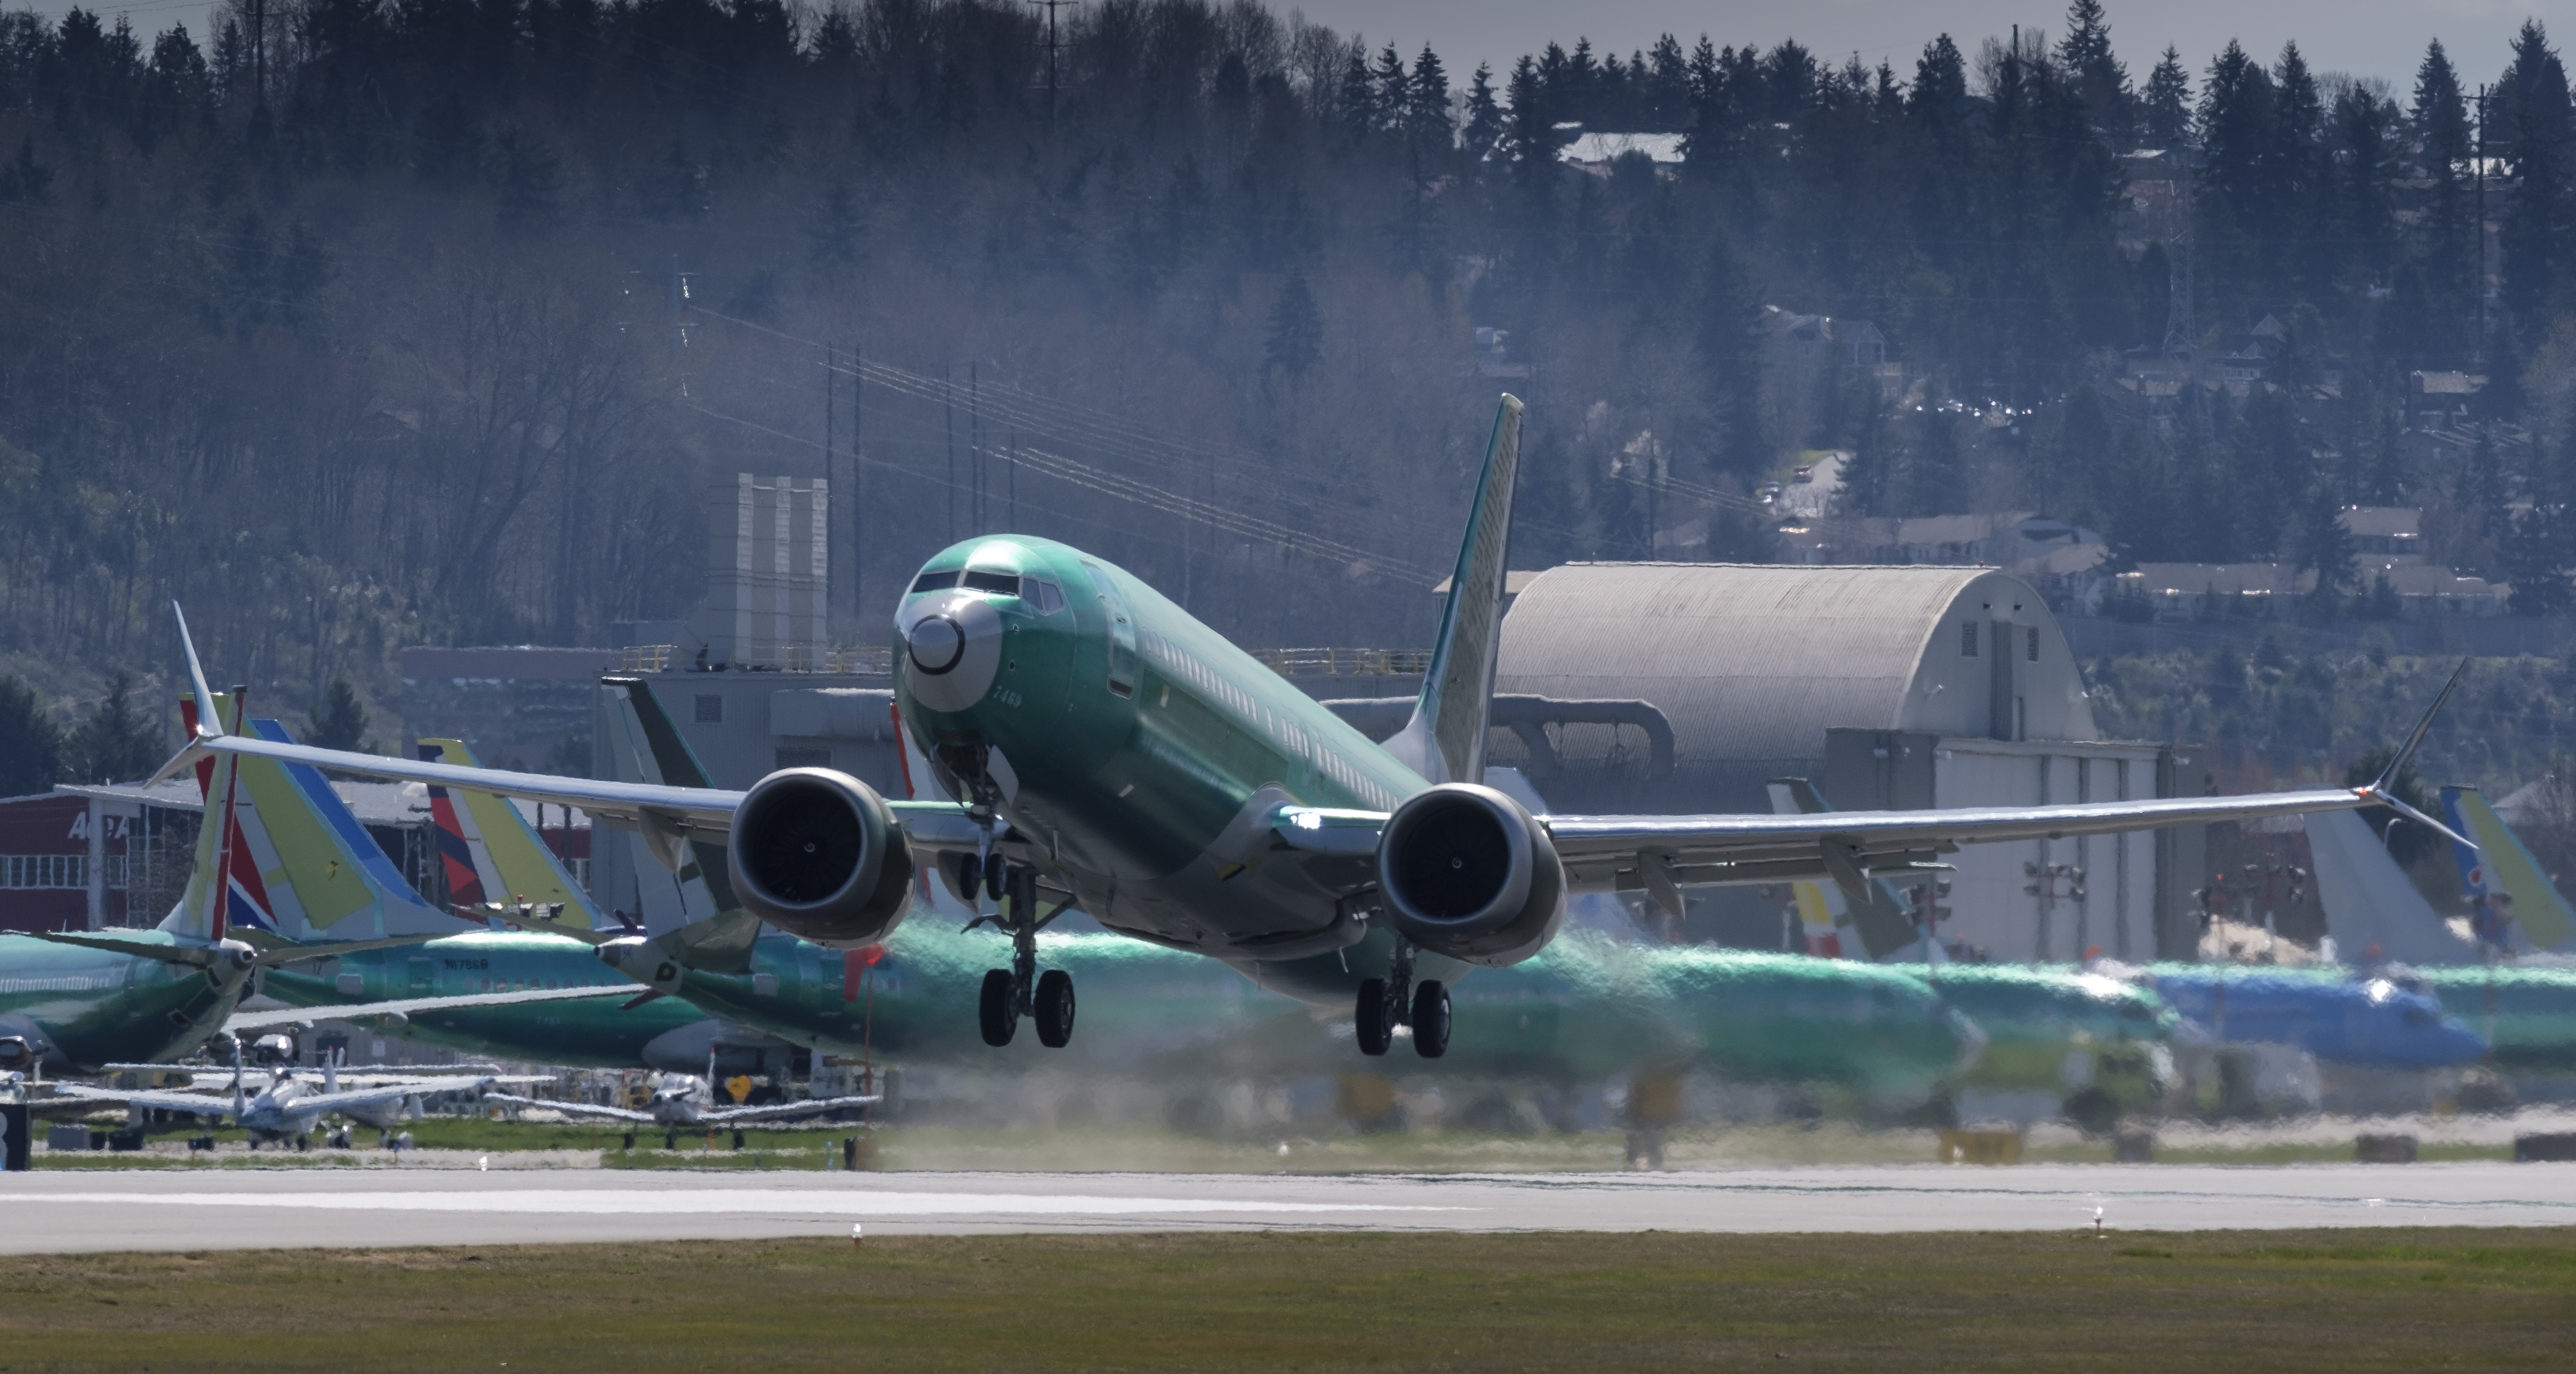 RENTON, WA - MARCH 22: A Boeing 737 MAX 8 airliner takes off from  Renton Municipal Airport near the company's factory, on March 22, 2019 in Renton, Washington. After two crashes of 737 MAX planes in five months, the model has been grounded from from passenger flights by aviation authorities throughout the world. (Photo by Stephen Brashear/Getty Images)